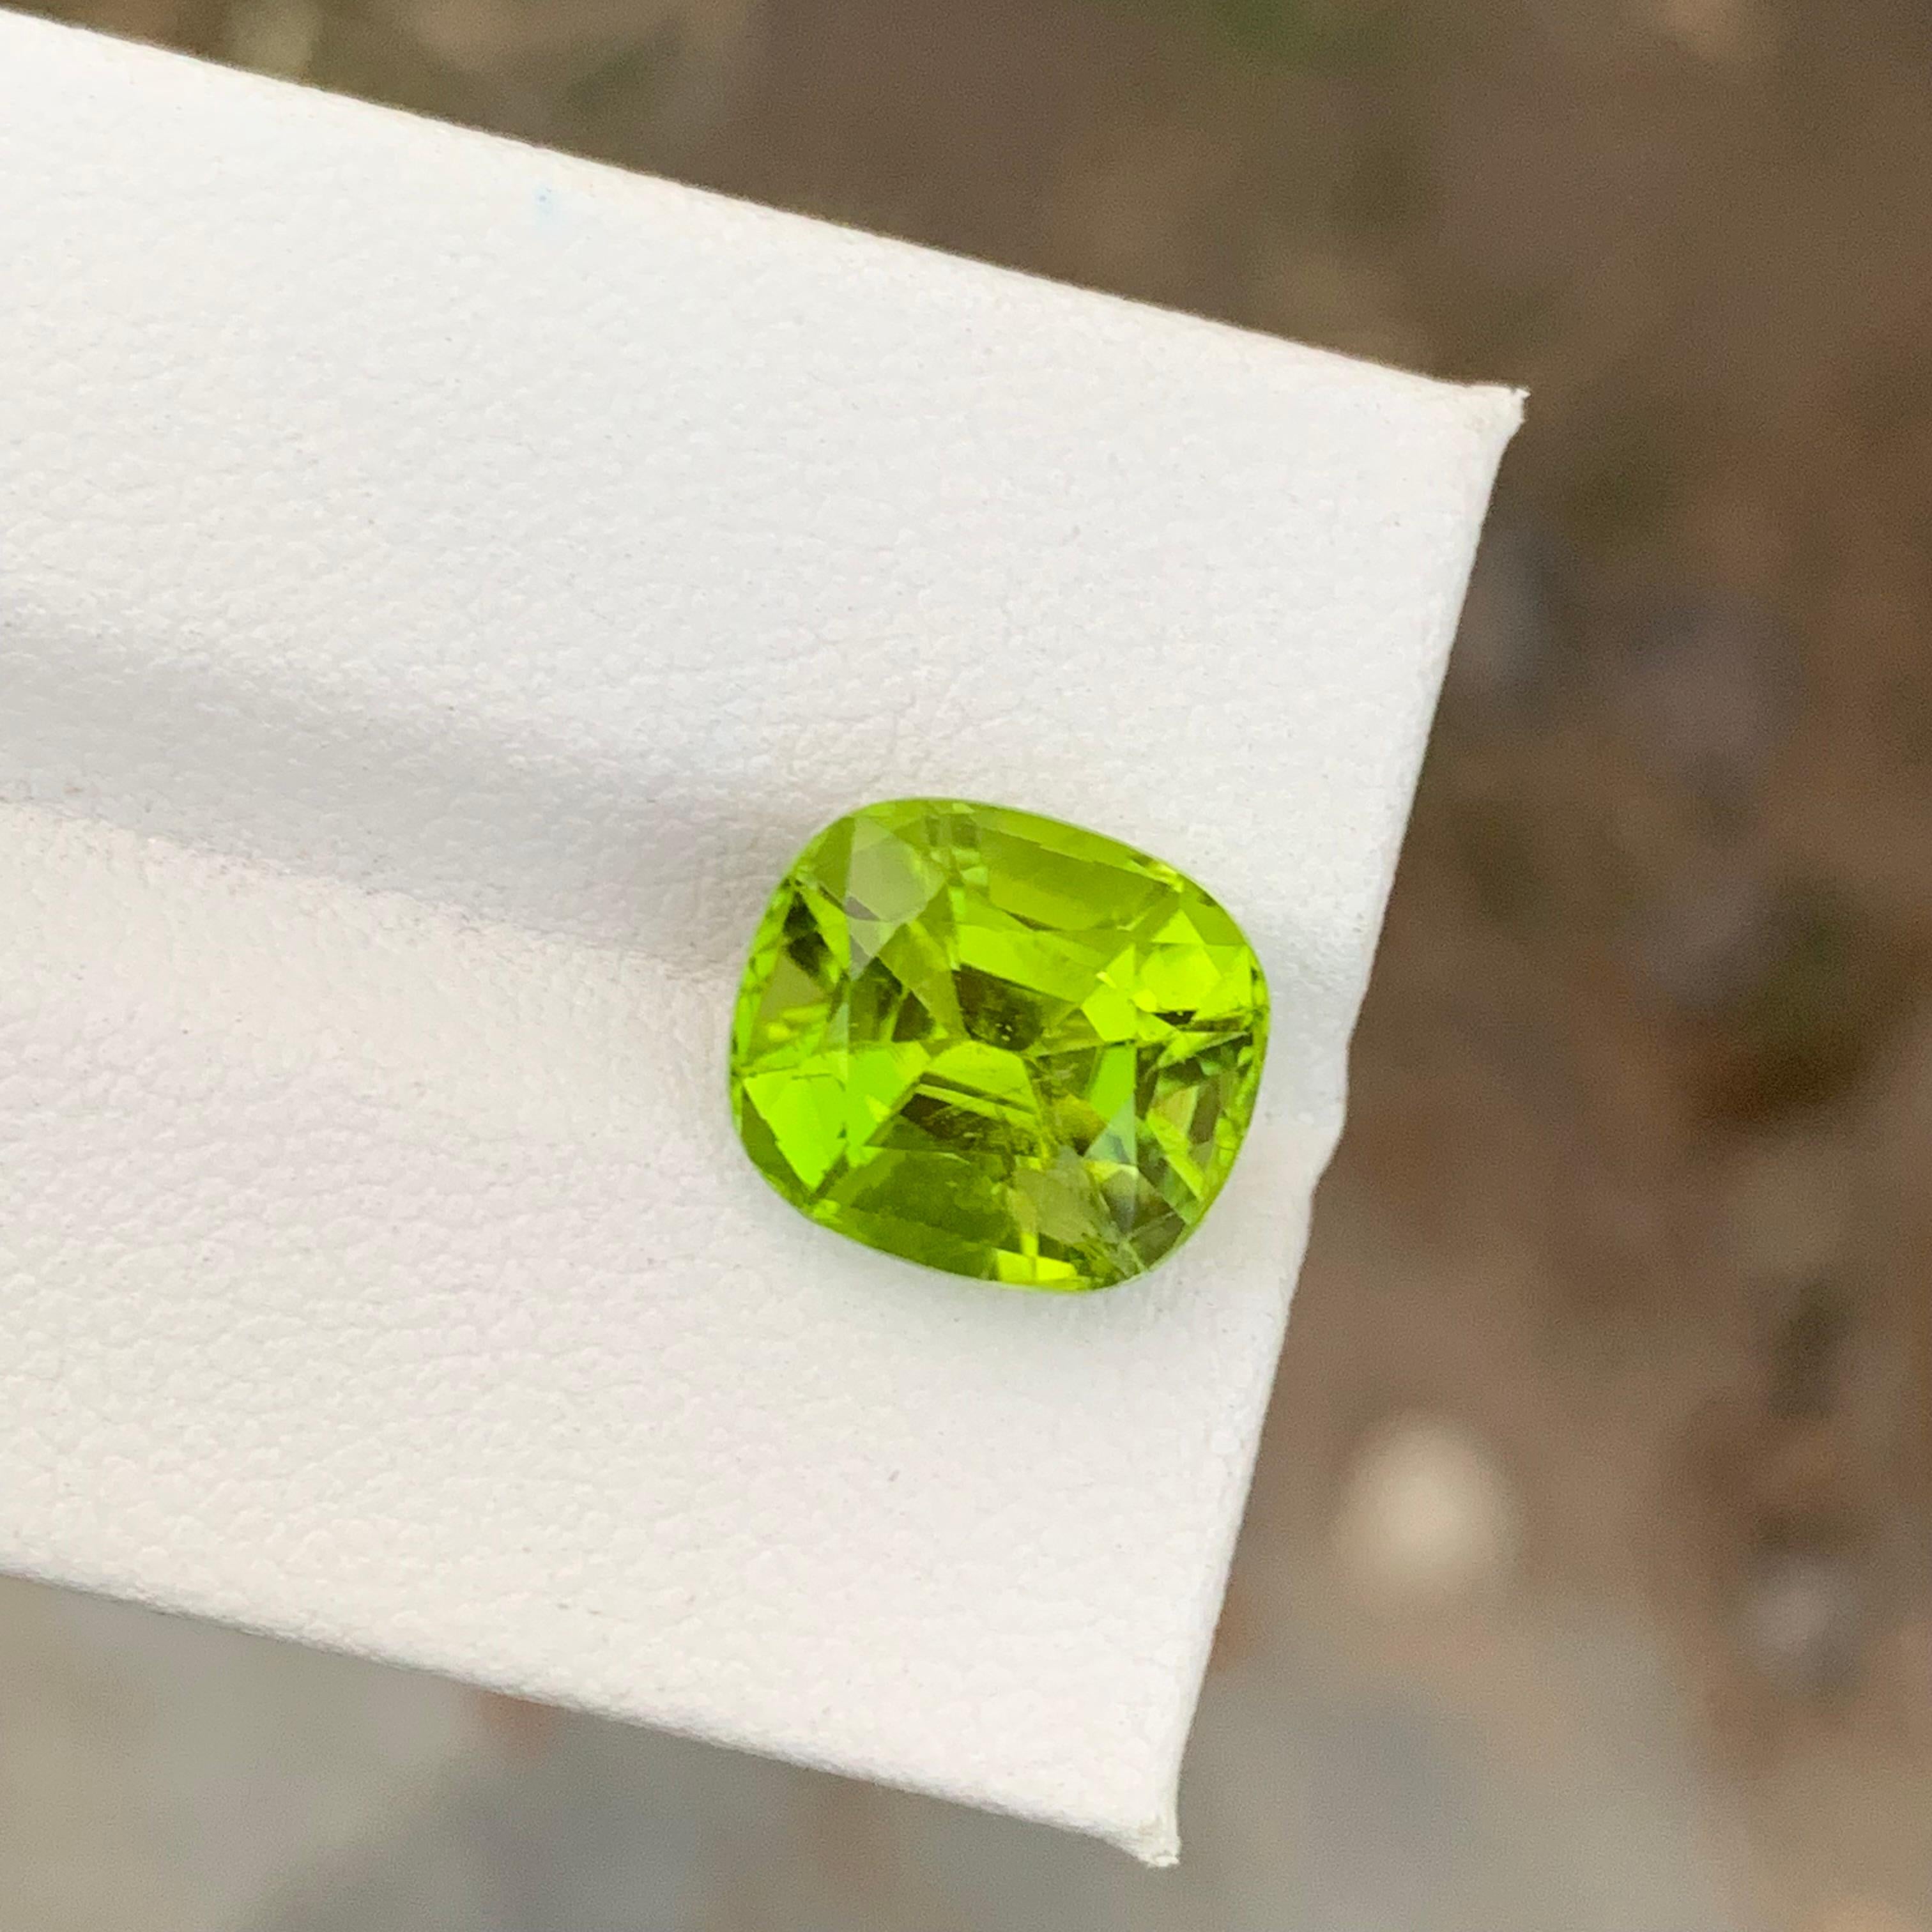 Stunning Natural Faceted Green Peridot Ring Gemstone 6.05 Carats  For Sale 6